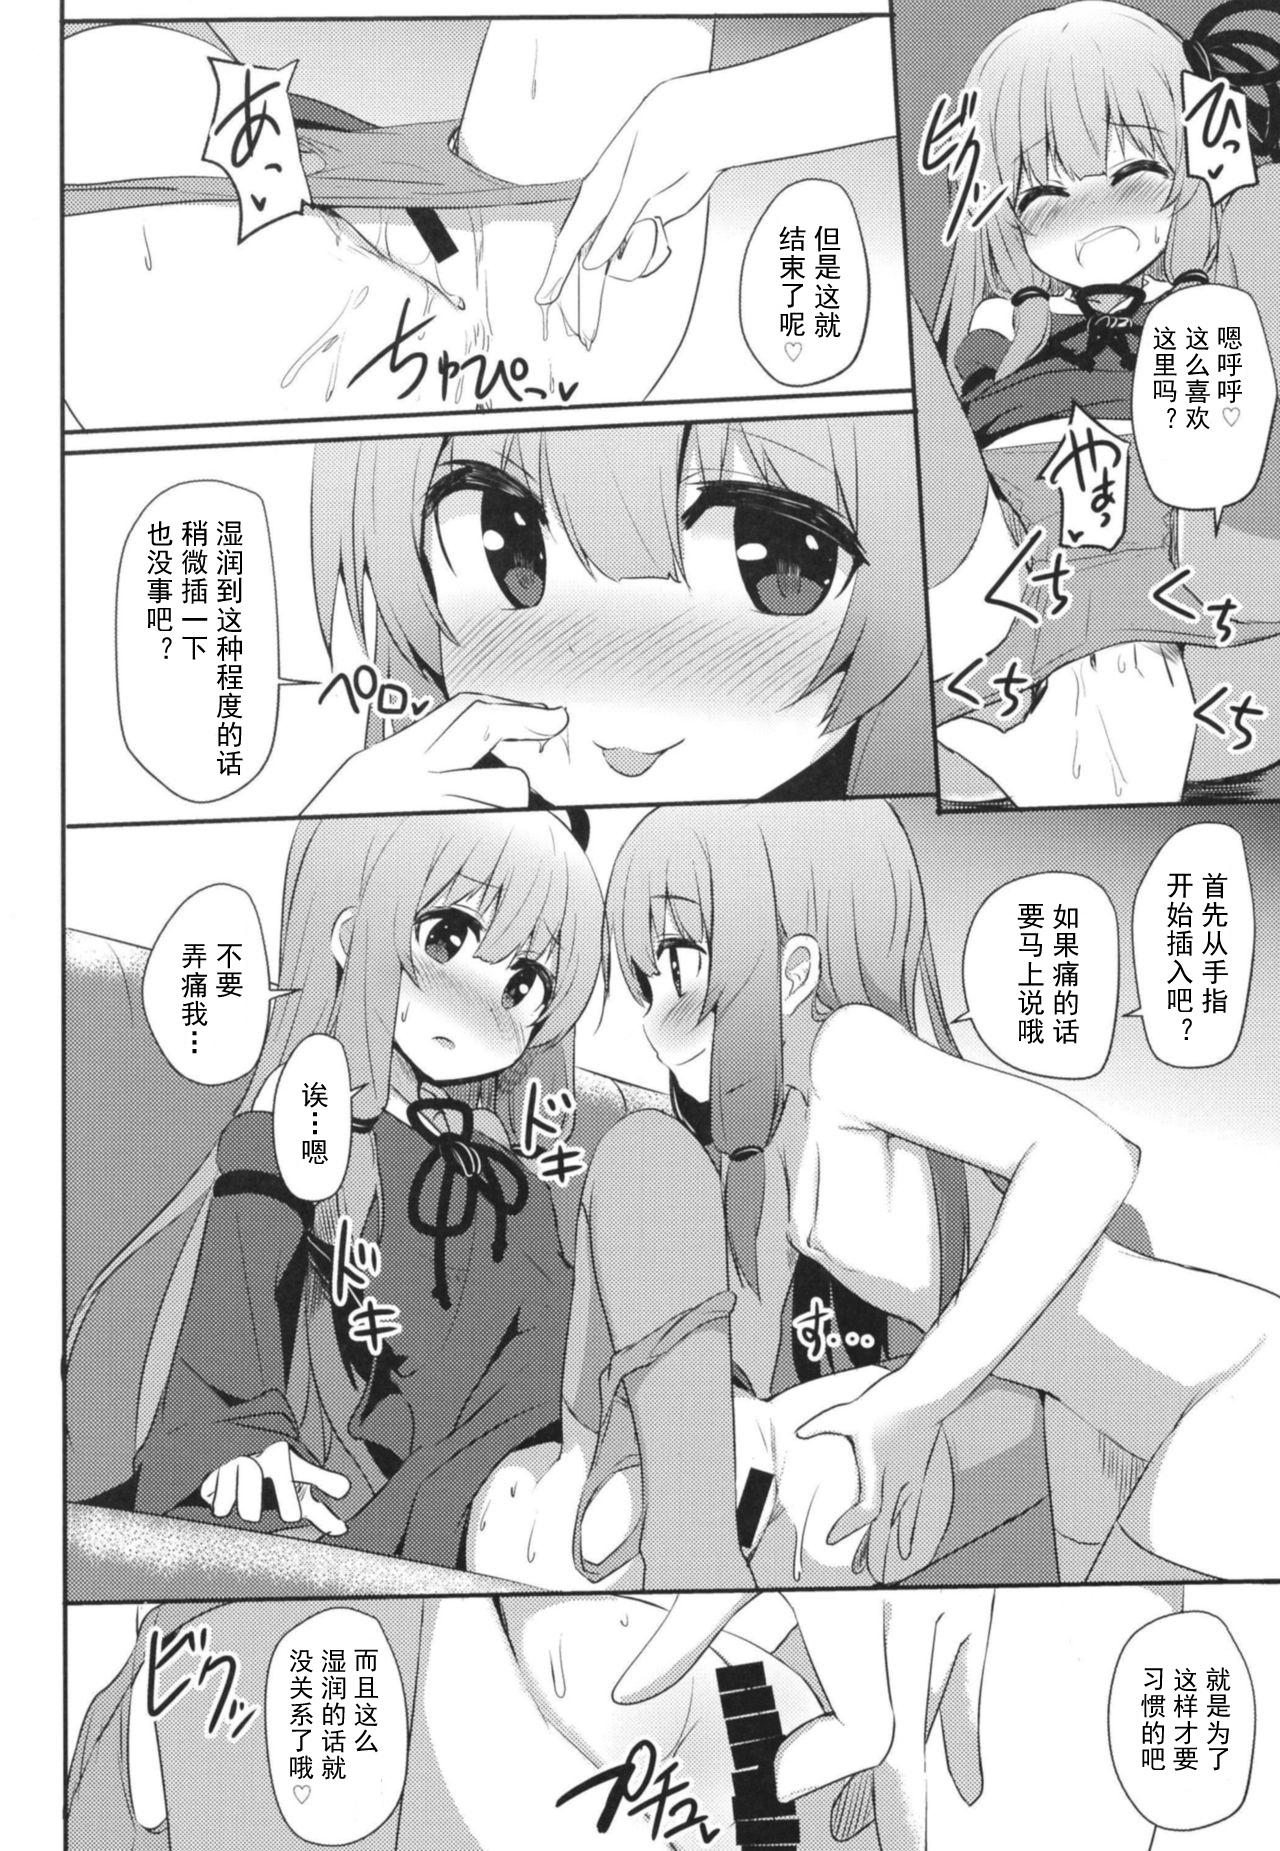 Family Taboo [Milk Pudding (Jamcy)] Akane-chan Challenge! 4-kaime (VOICEROID) [Chinese] [古早个人汉化] [Digital] - Voiceroid Orgy - Page 6